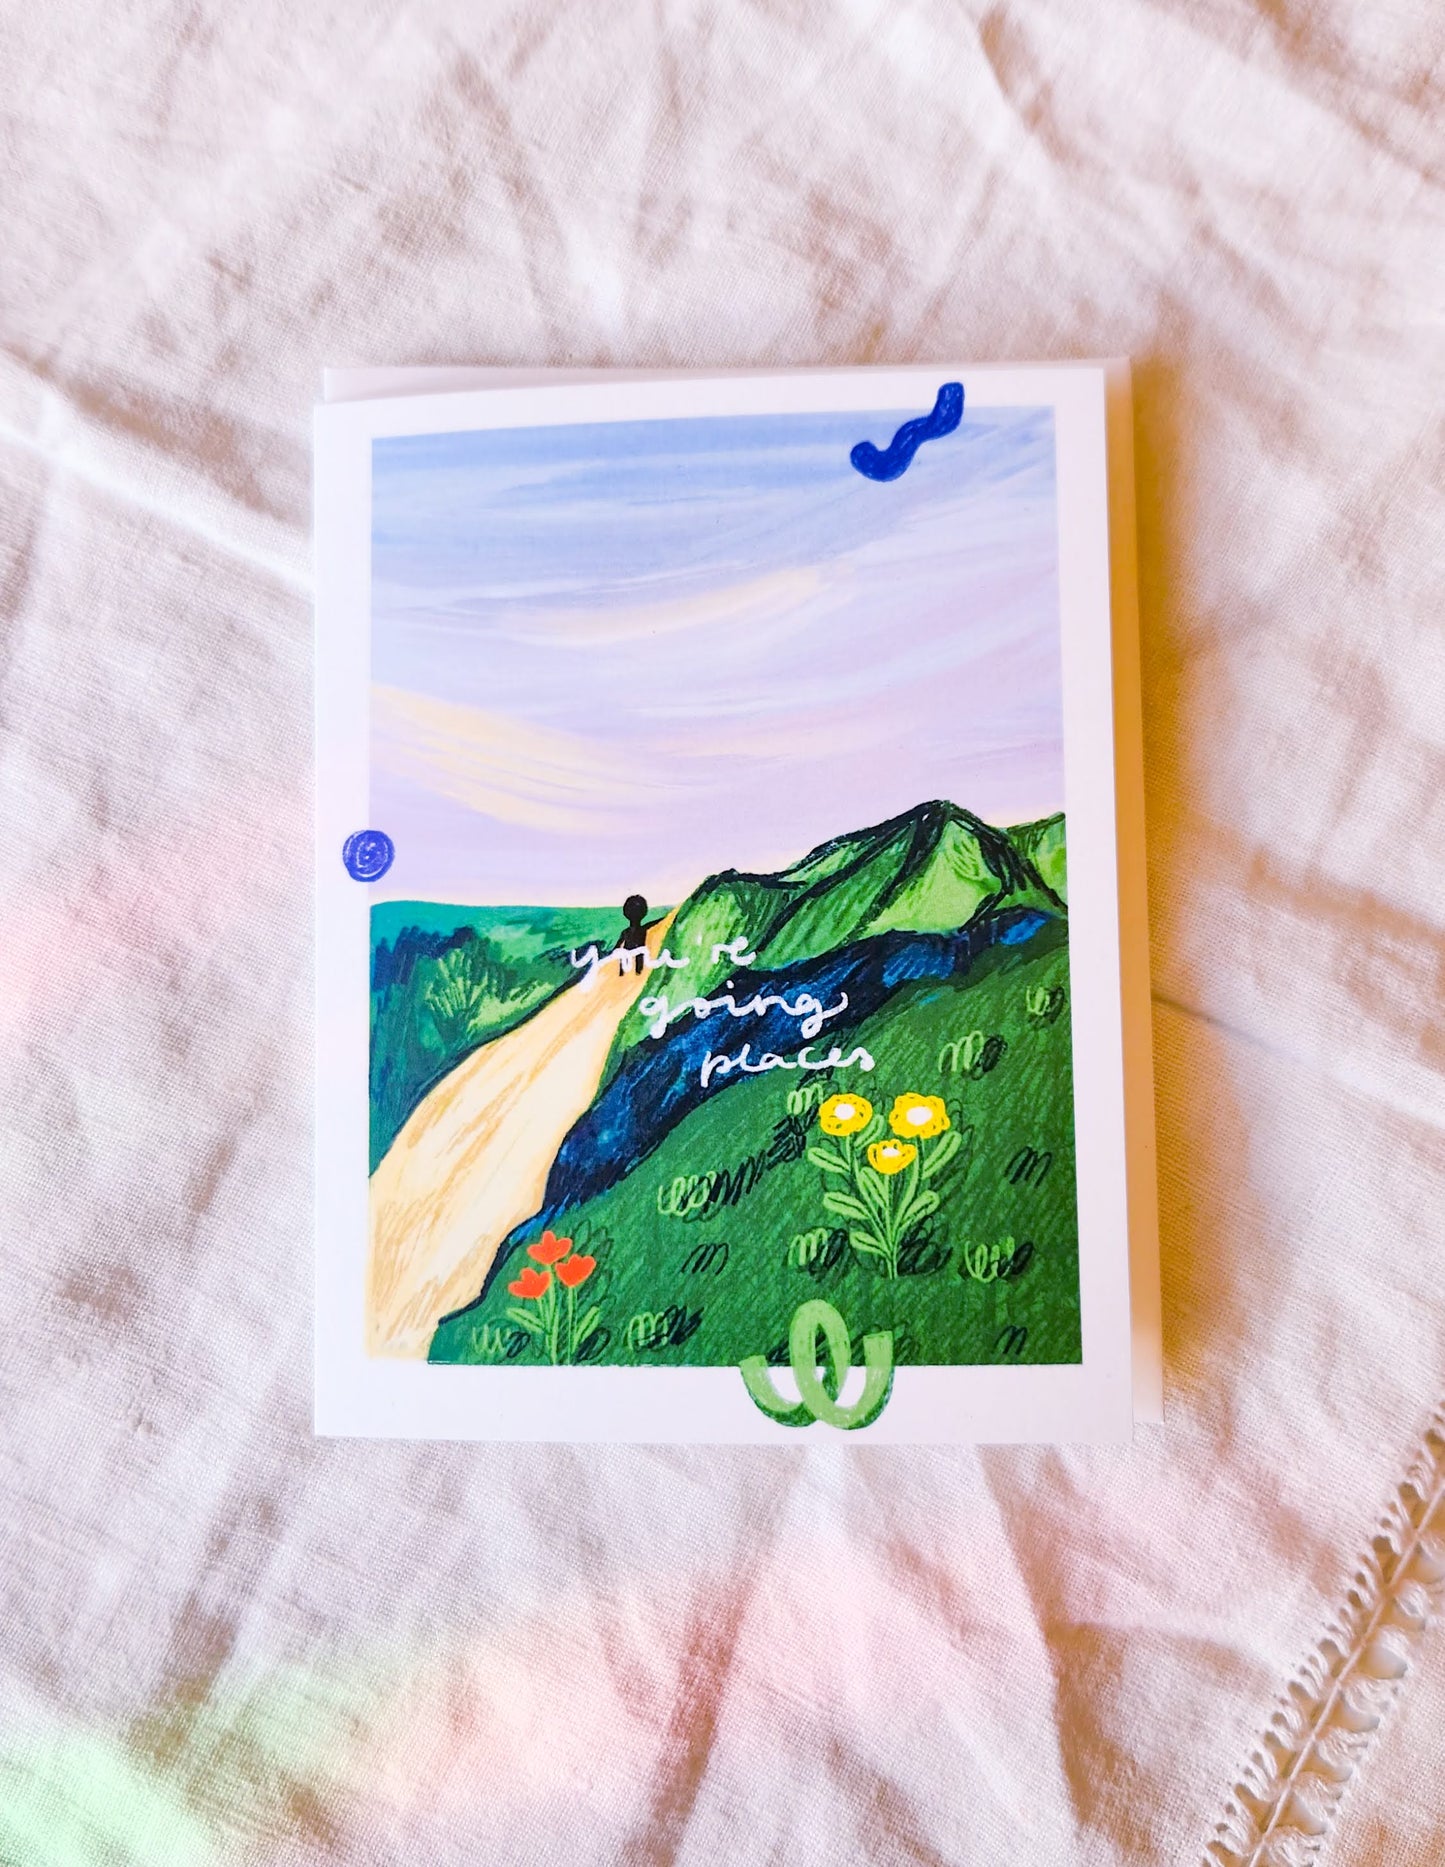 Farewell Greeting Card - You're Going Places